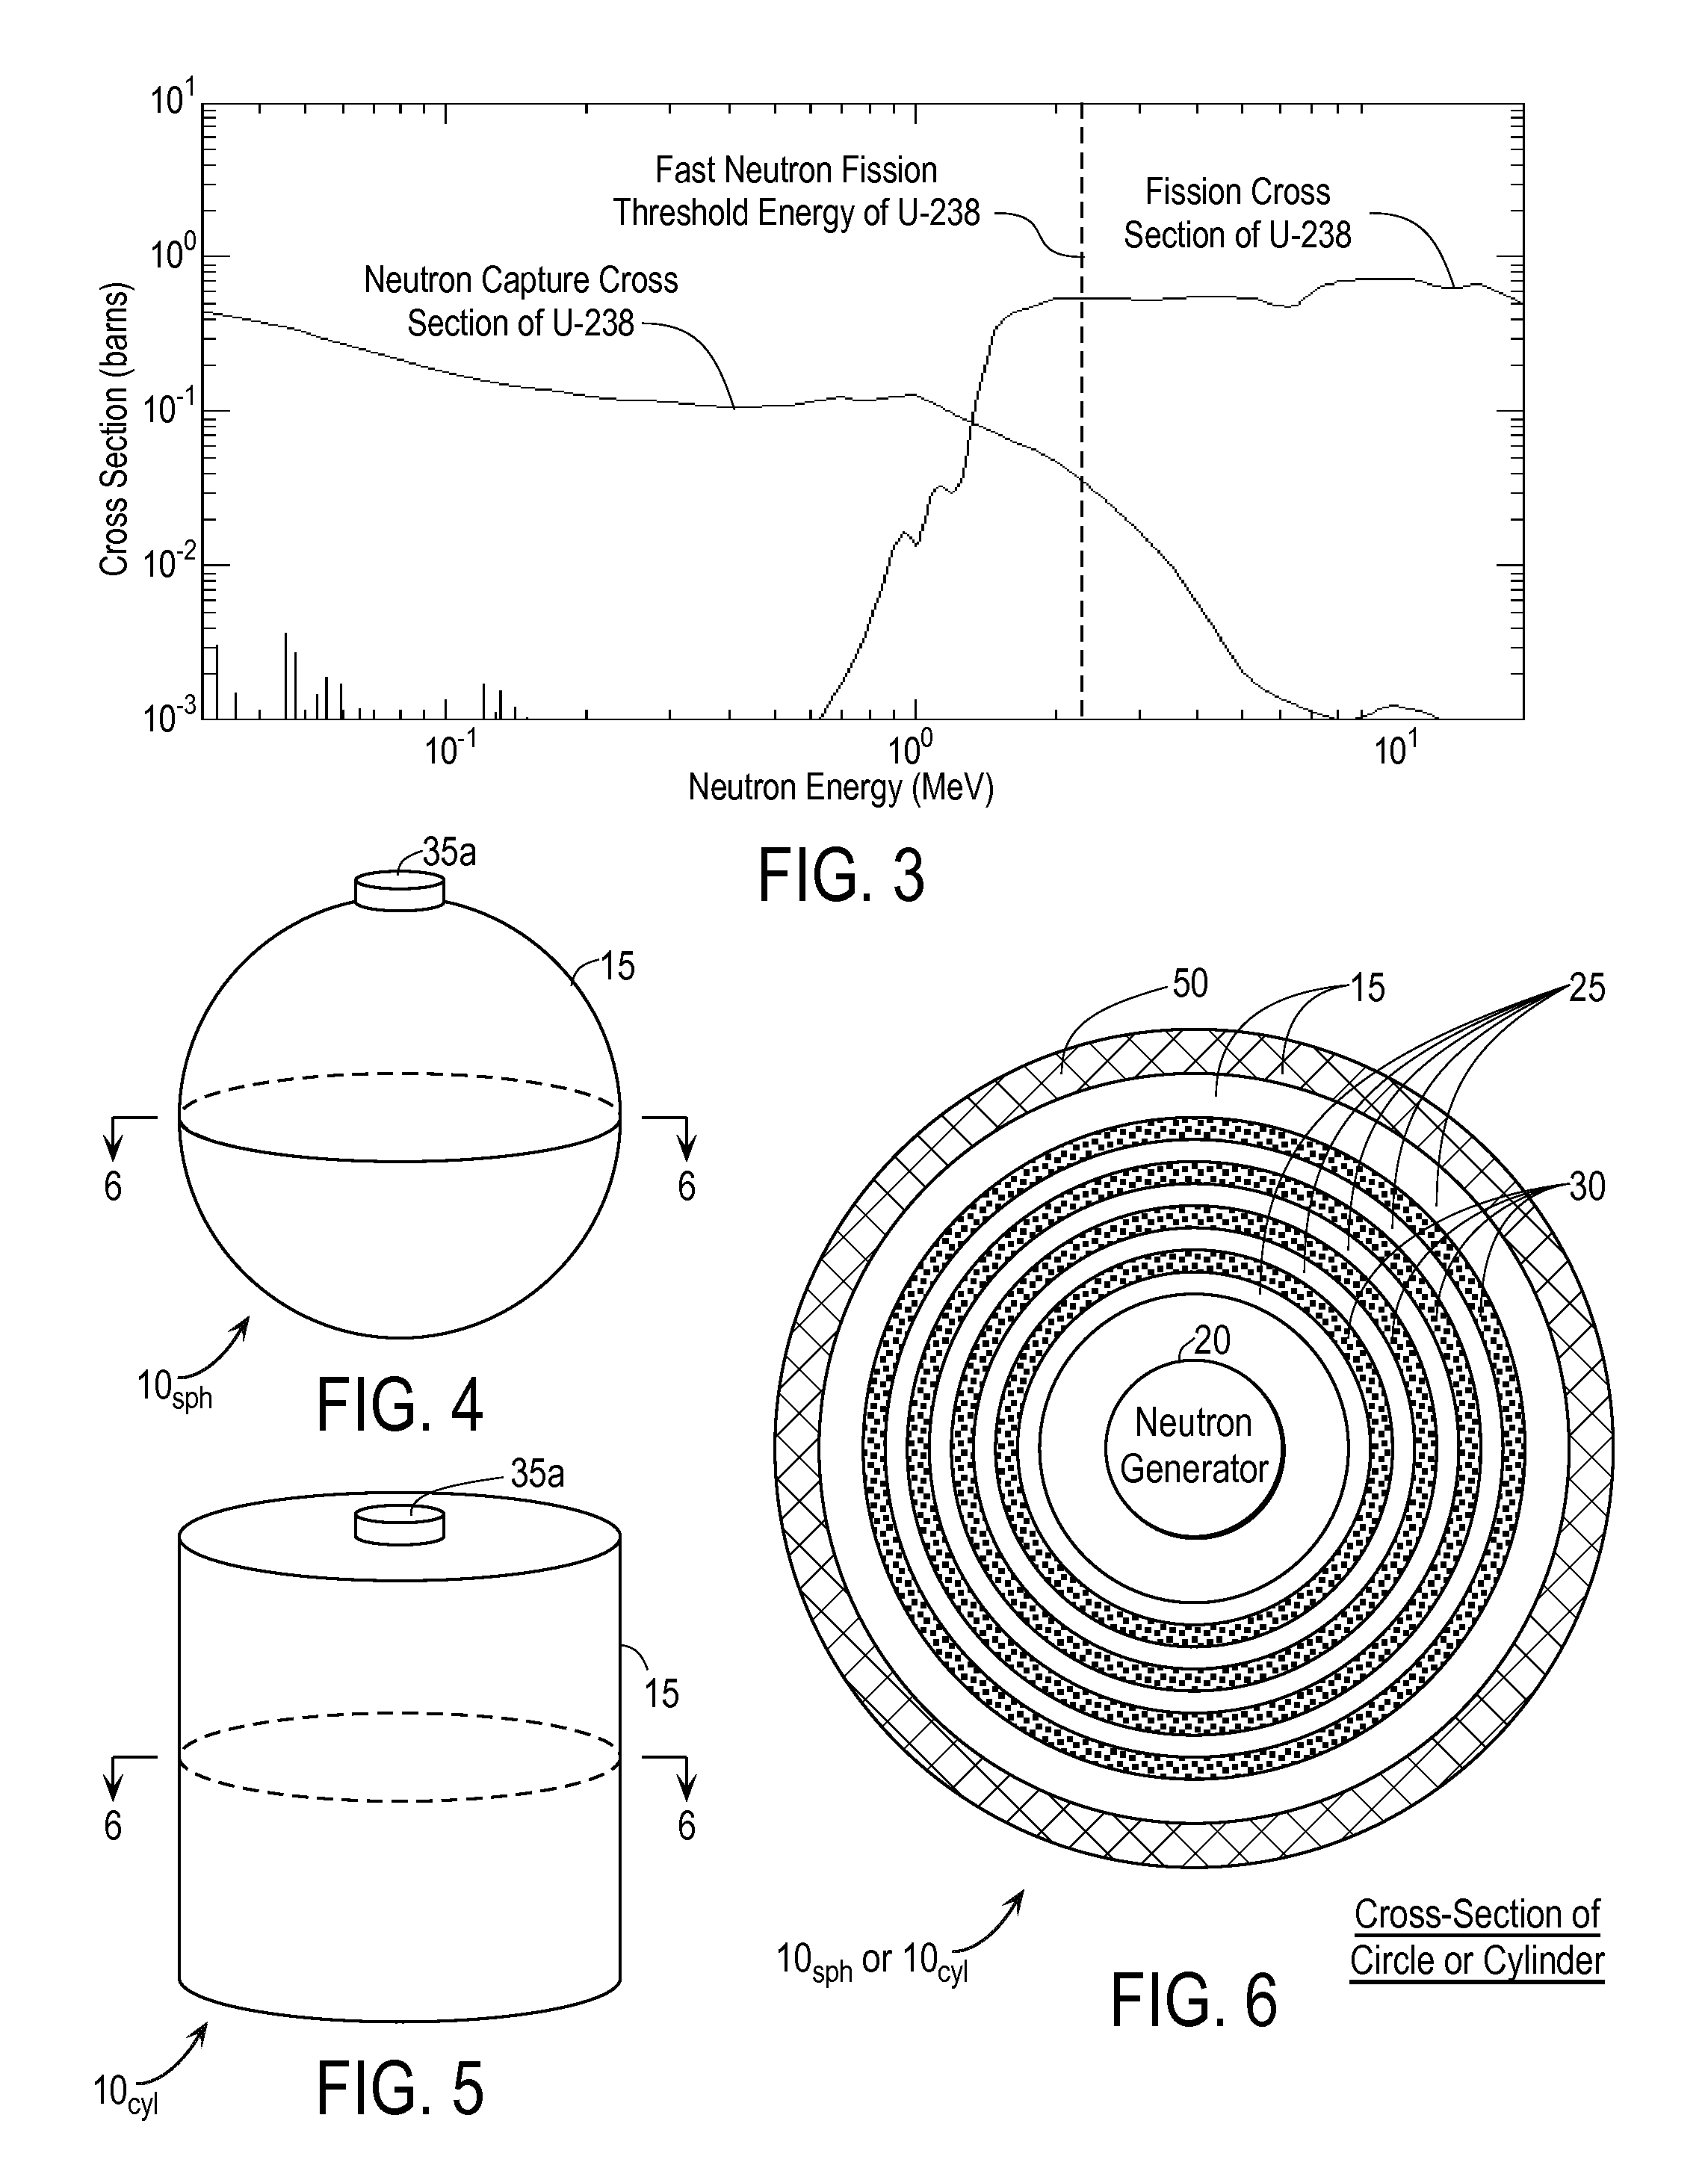 Techniques for On-Demand Production of Medical Radioactive Iodine Isotopes Including I-131